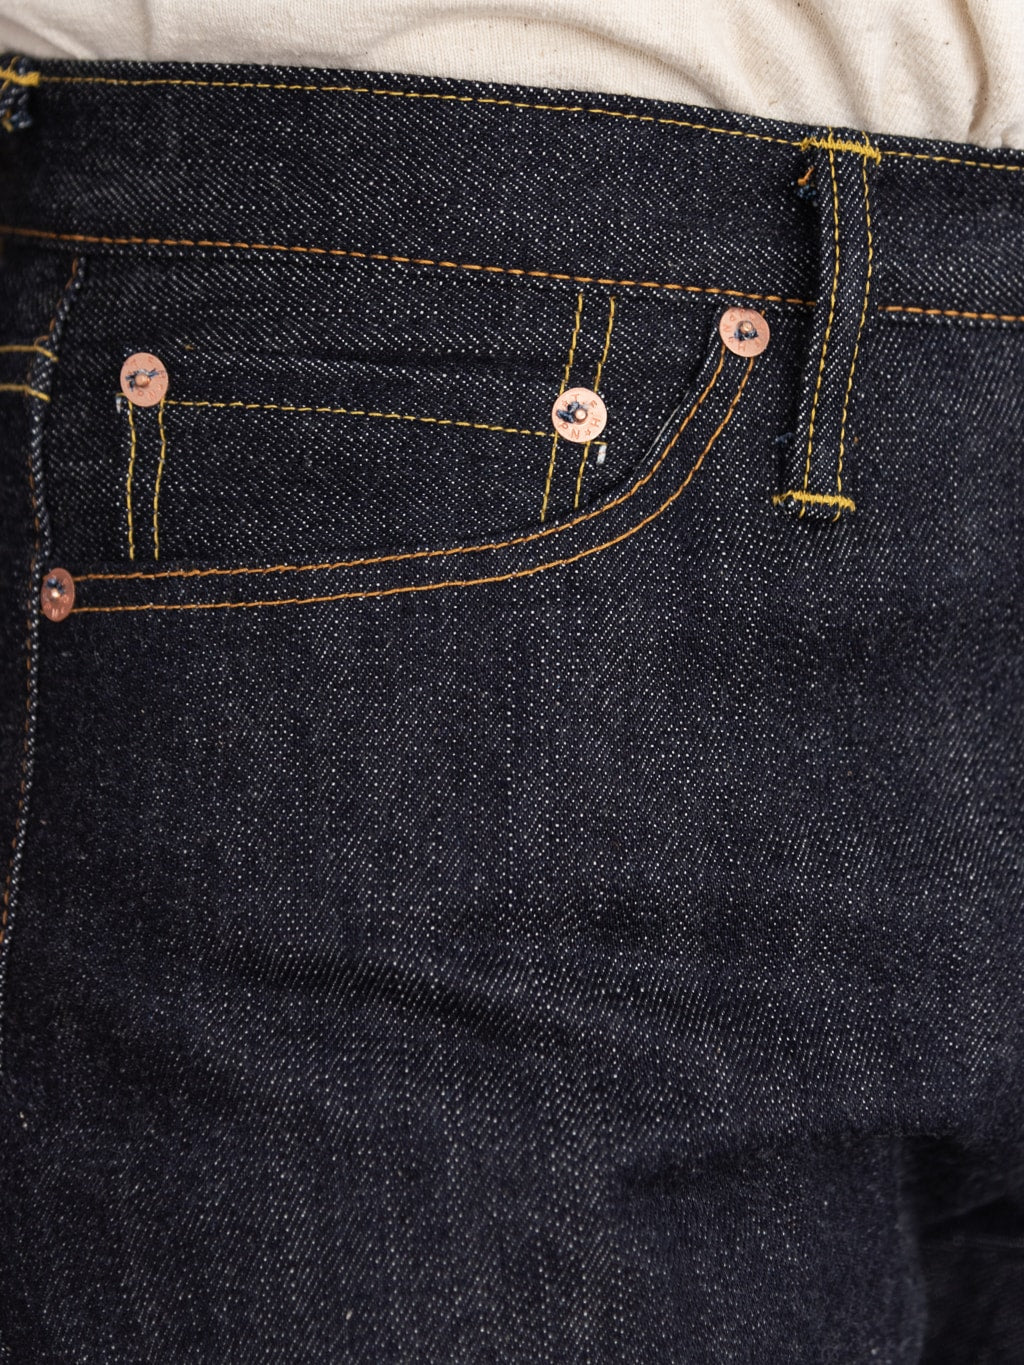 The Flat Head 3002 14.5oz Slim Tapered selvedge Jeans front pocket detail